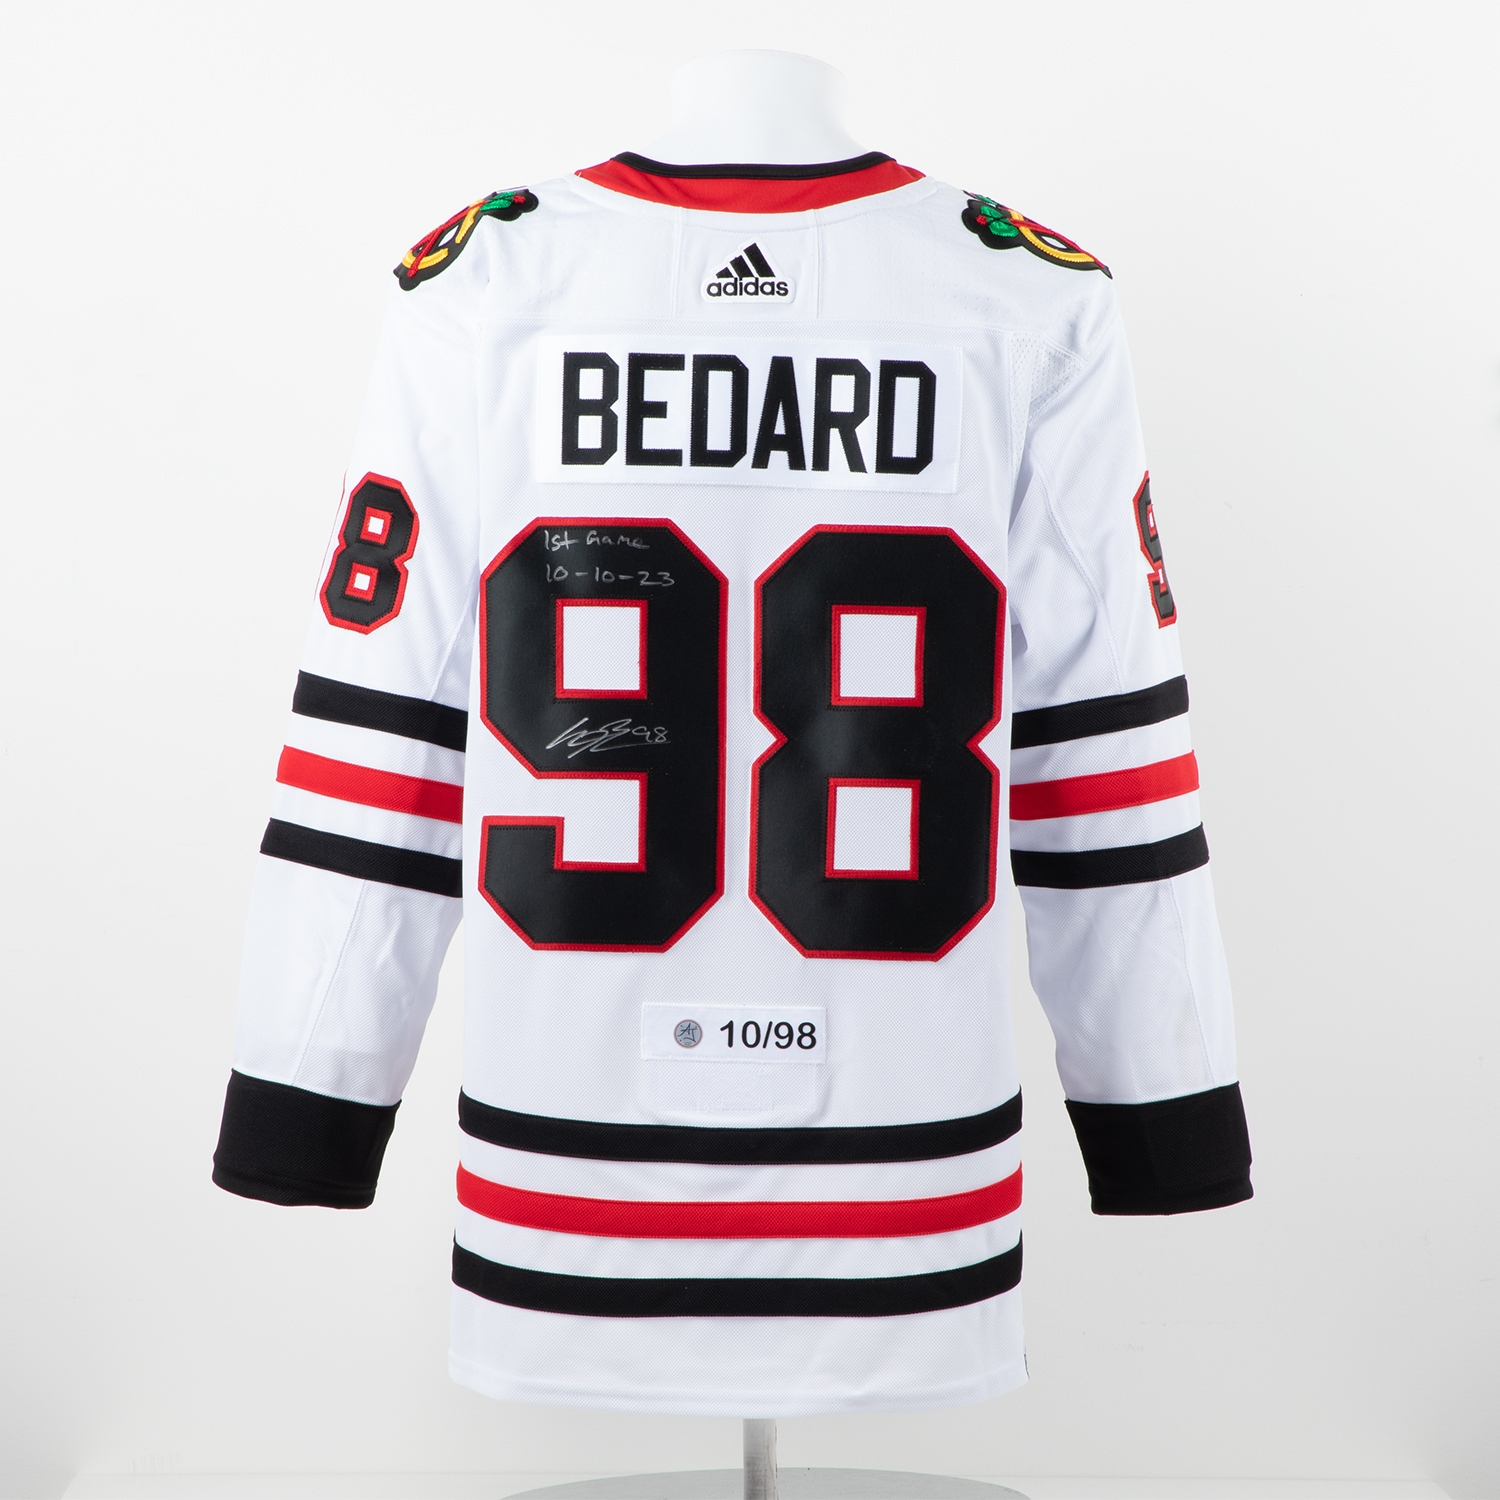 Connor Bedard Signed Chicago Blackhawks Adidas Jersey with 1st Game Note #10/98